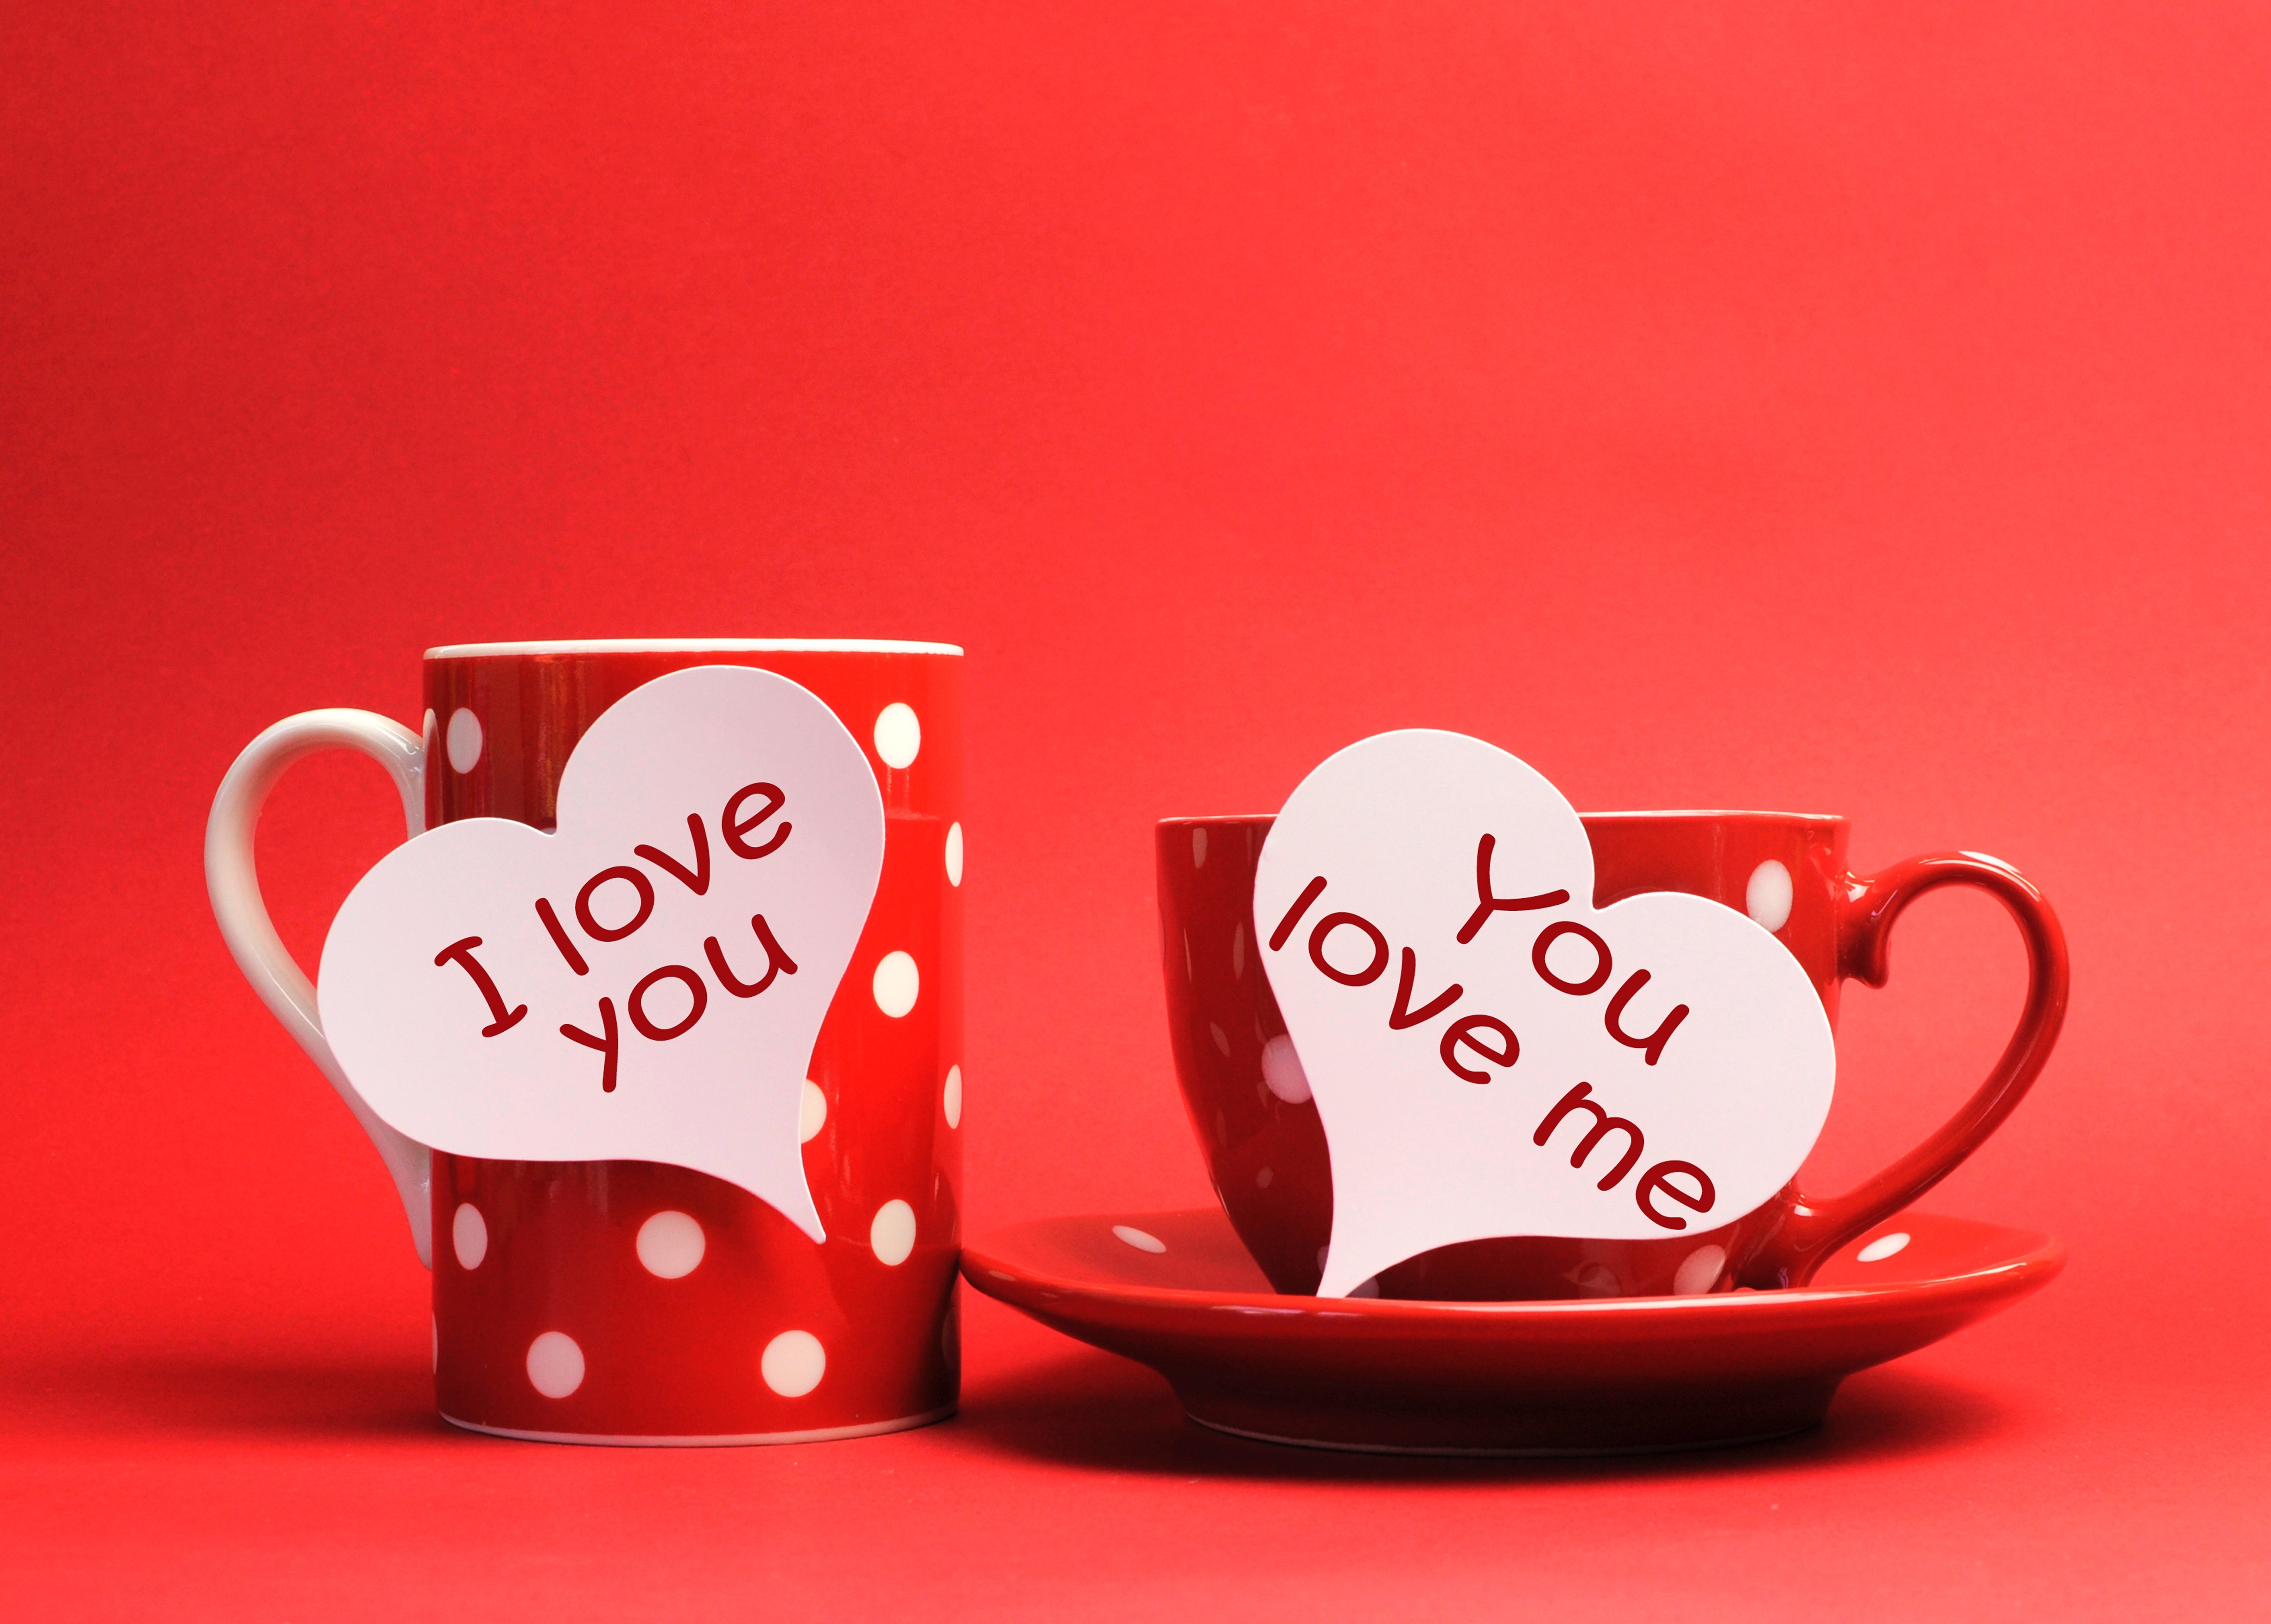 artistic, love, cup, red